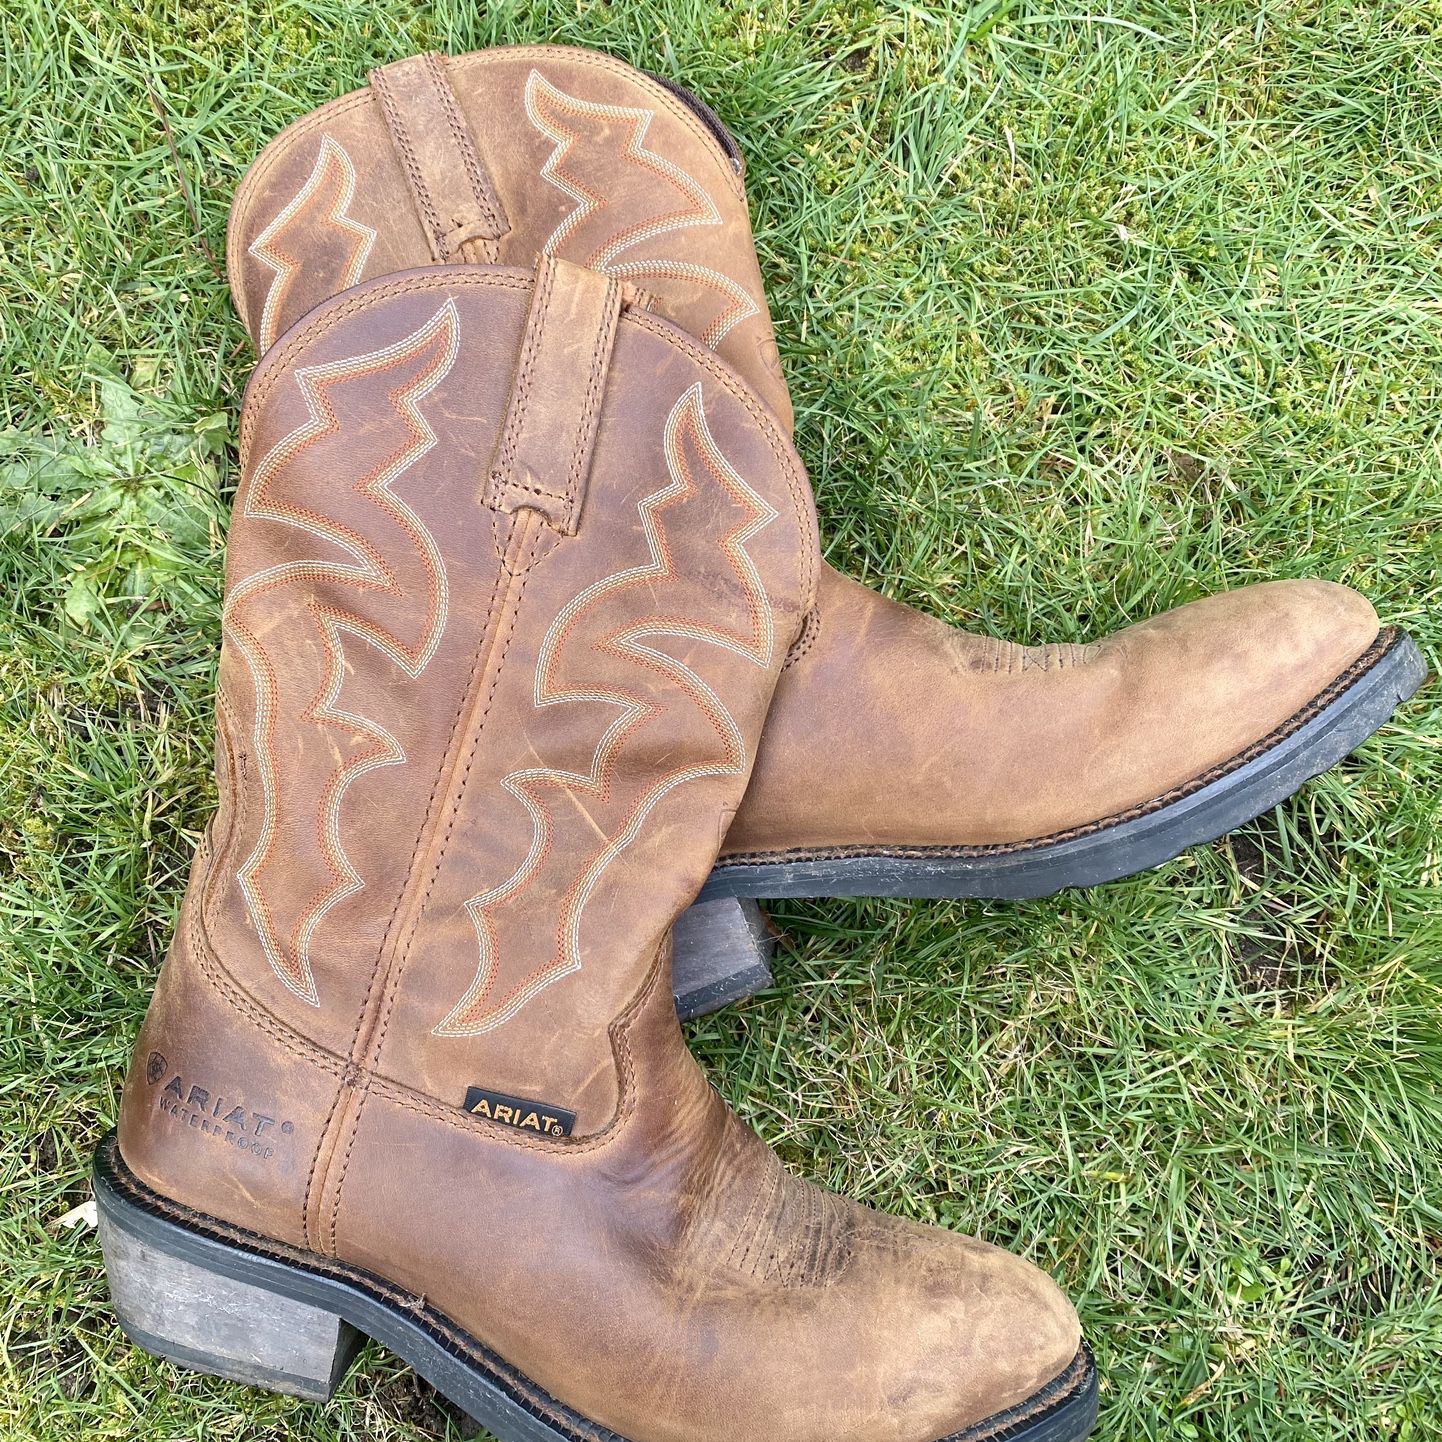 Ariat Cowboy Boots *Waterproof* Excellent Condition